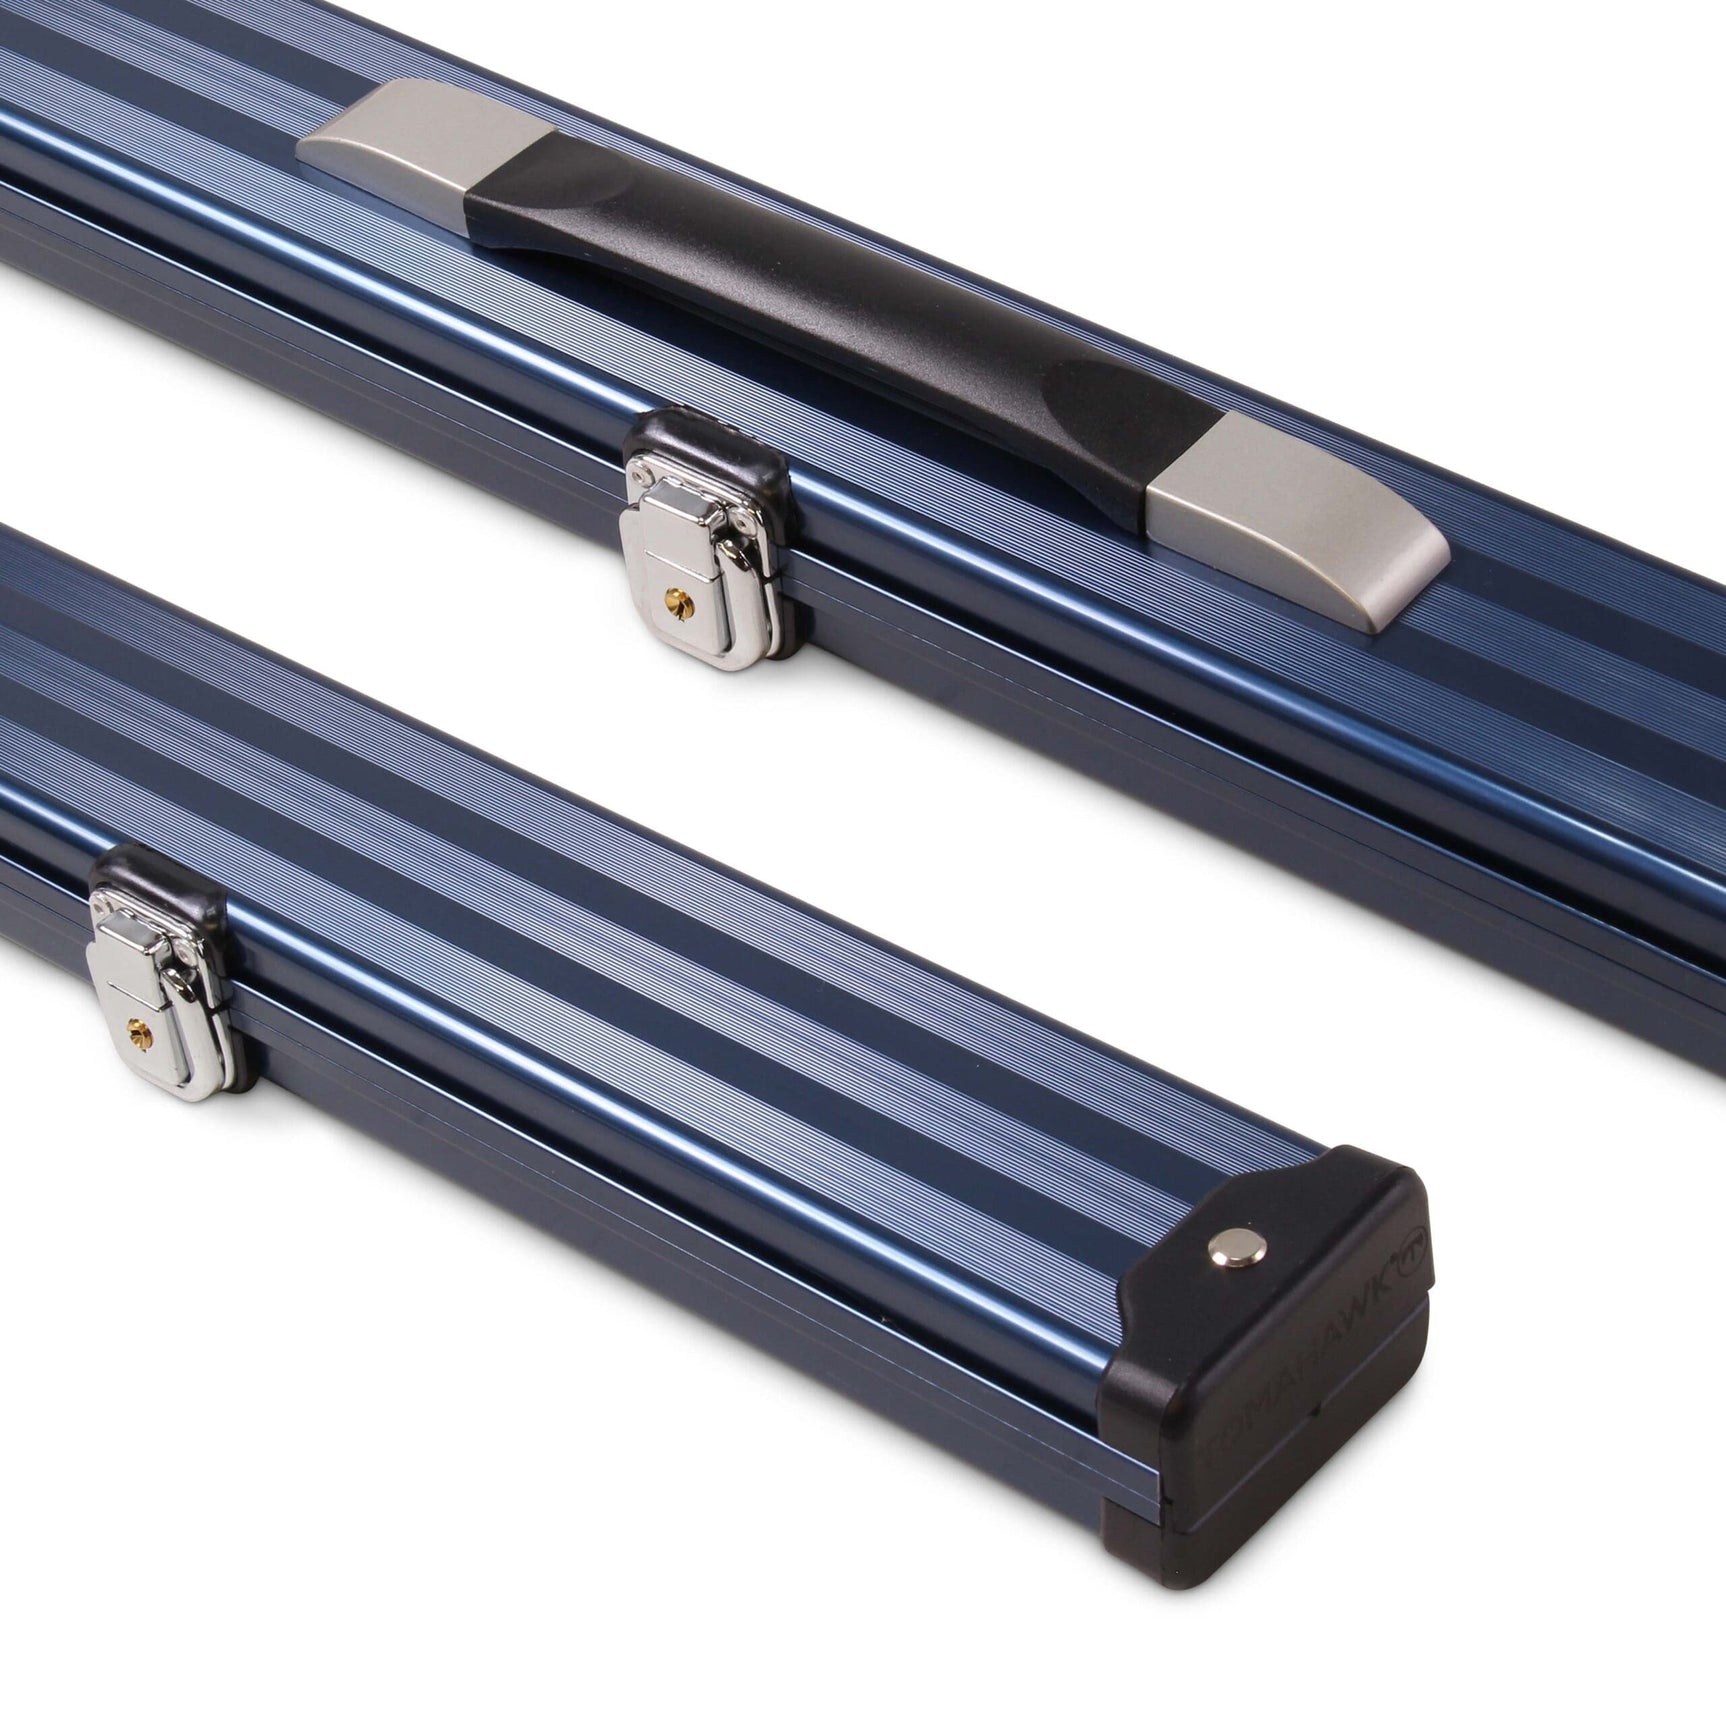 3/4 Lockable Aluminium Snooker Pool Cue Case with Tough Plastic Ends - Holds 1 3/4 Joint Cue + Extensions